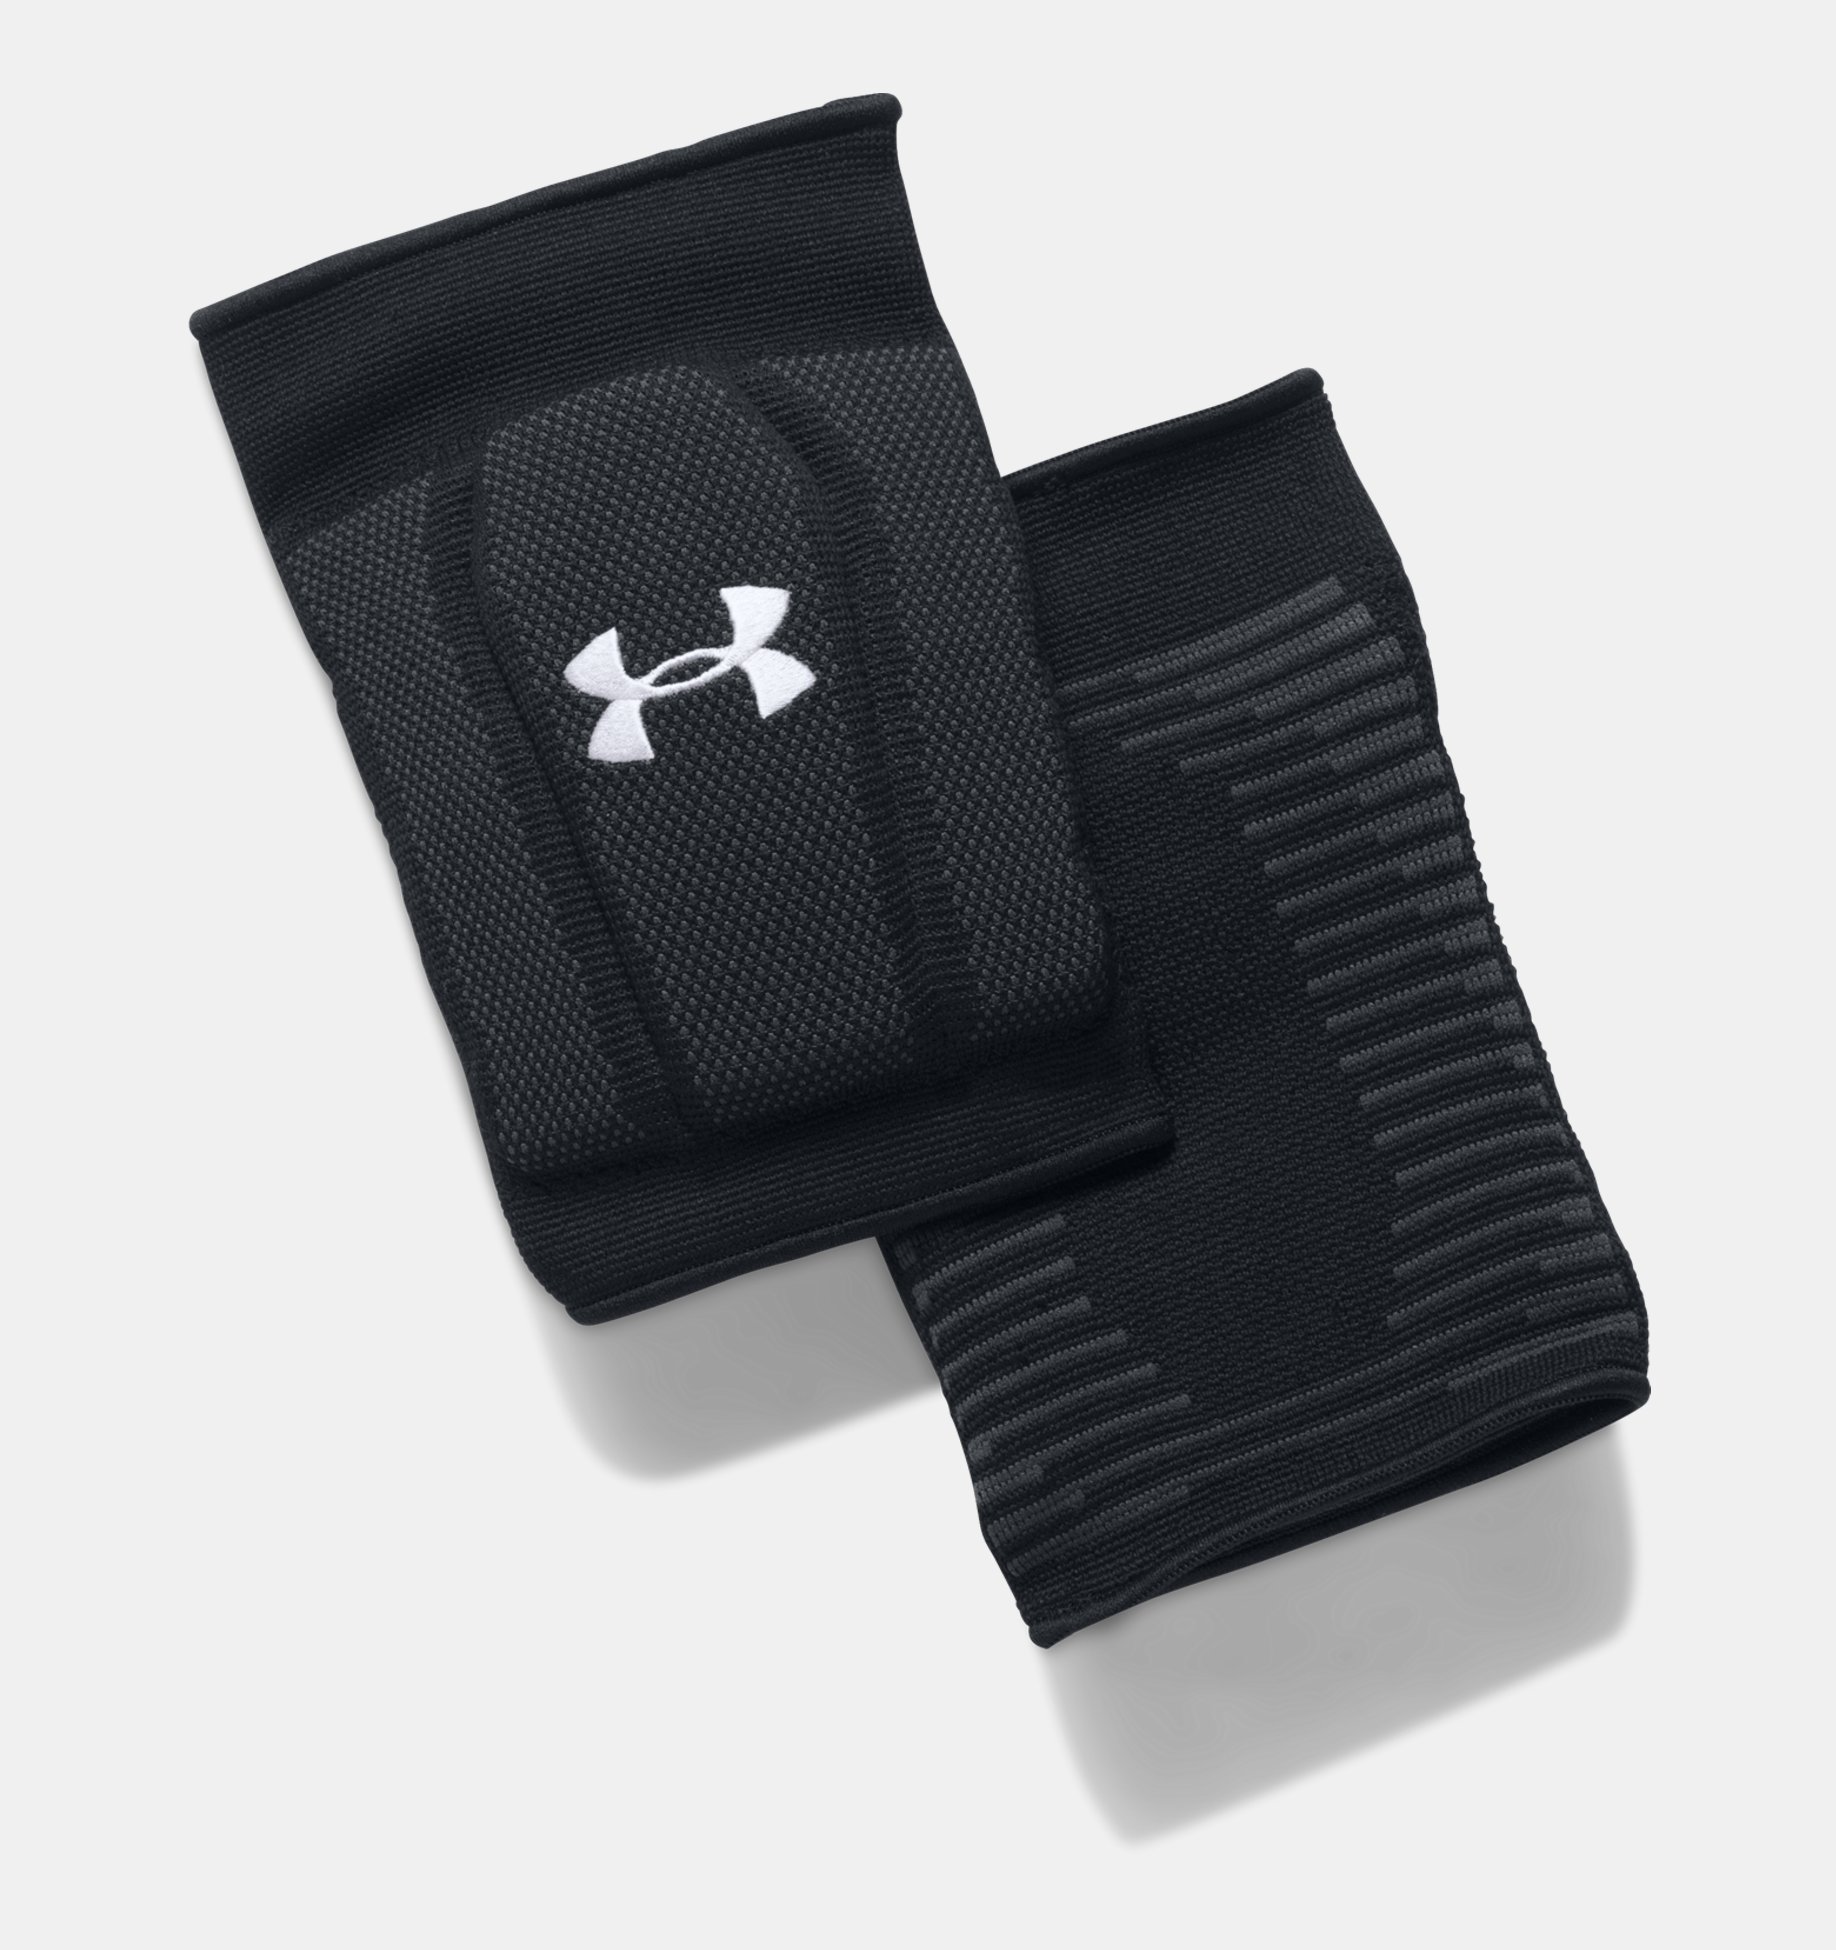 Under Armour HeatGear One Pair Size Small Black Volleyball Knee Pads for sale online 